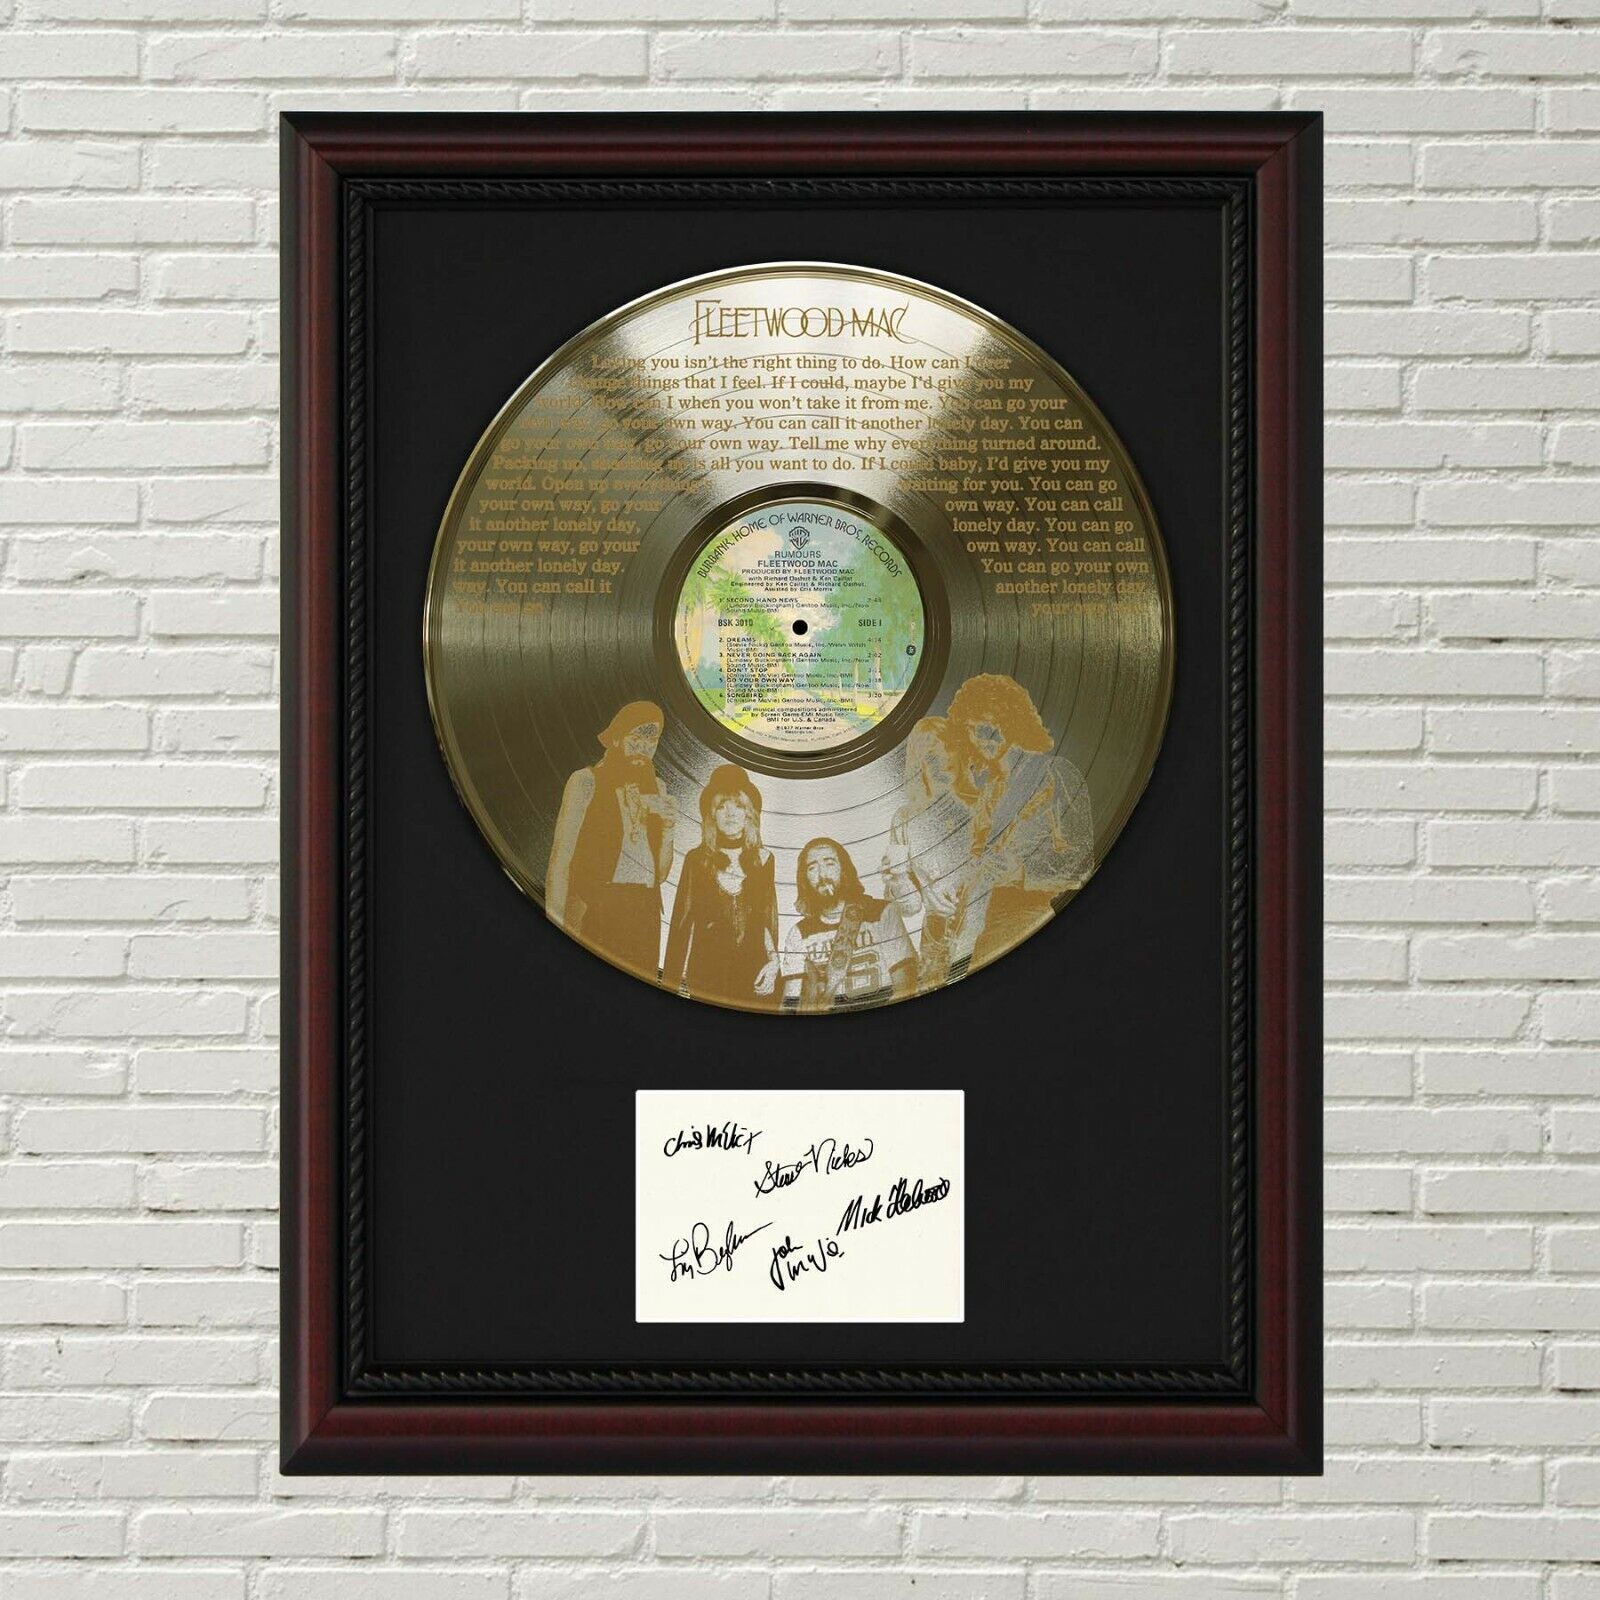 Fleetwood Mac - Go Your Own Way Gold LP Record Framed Signature Display